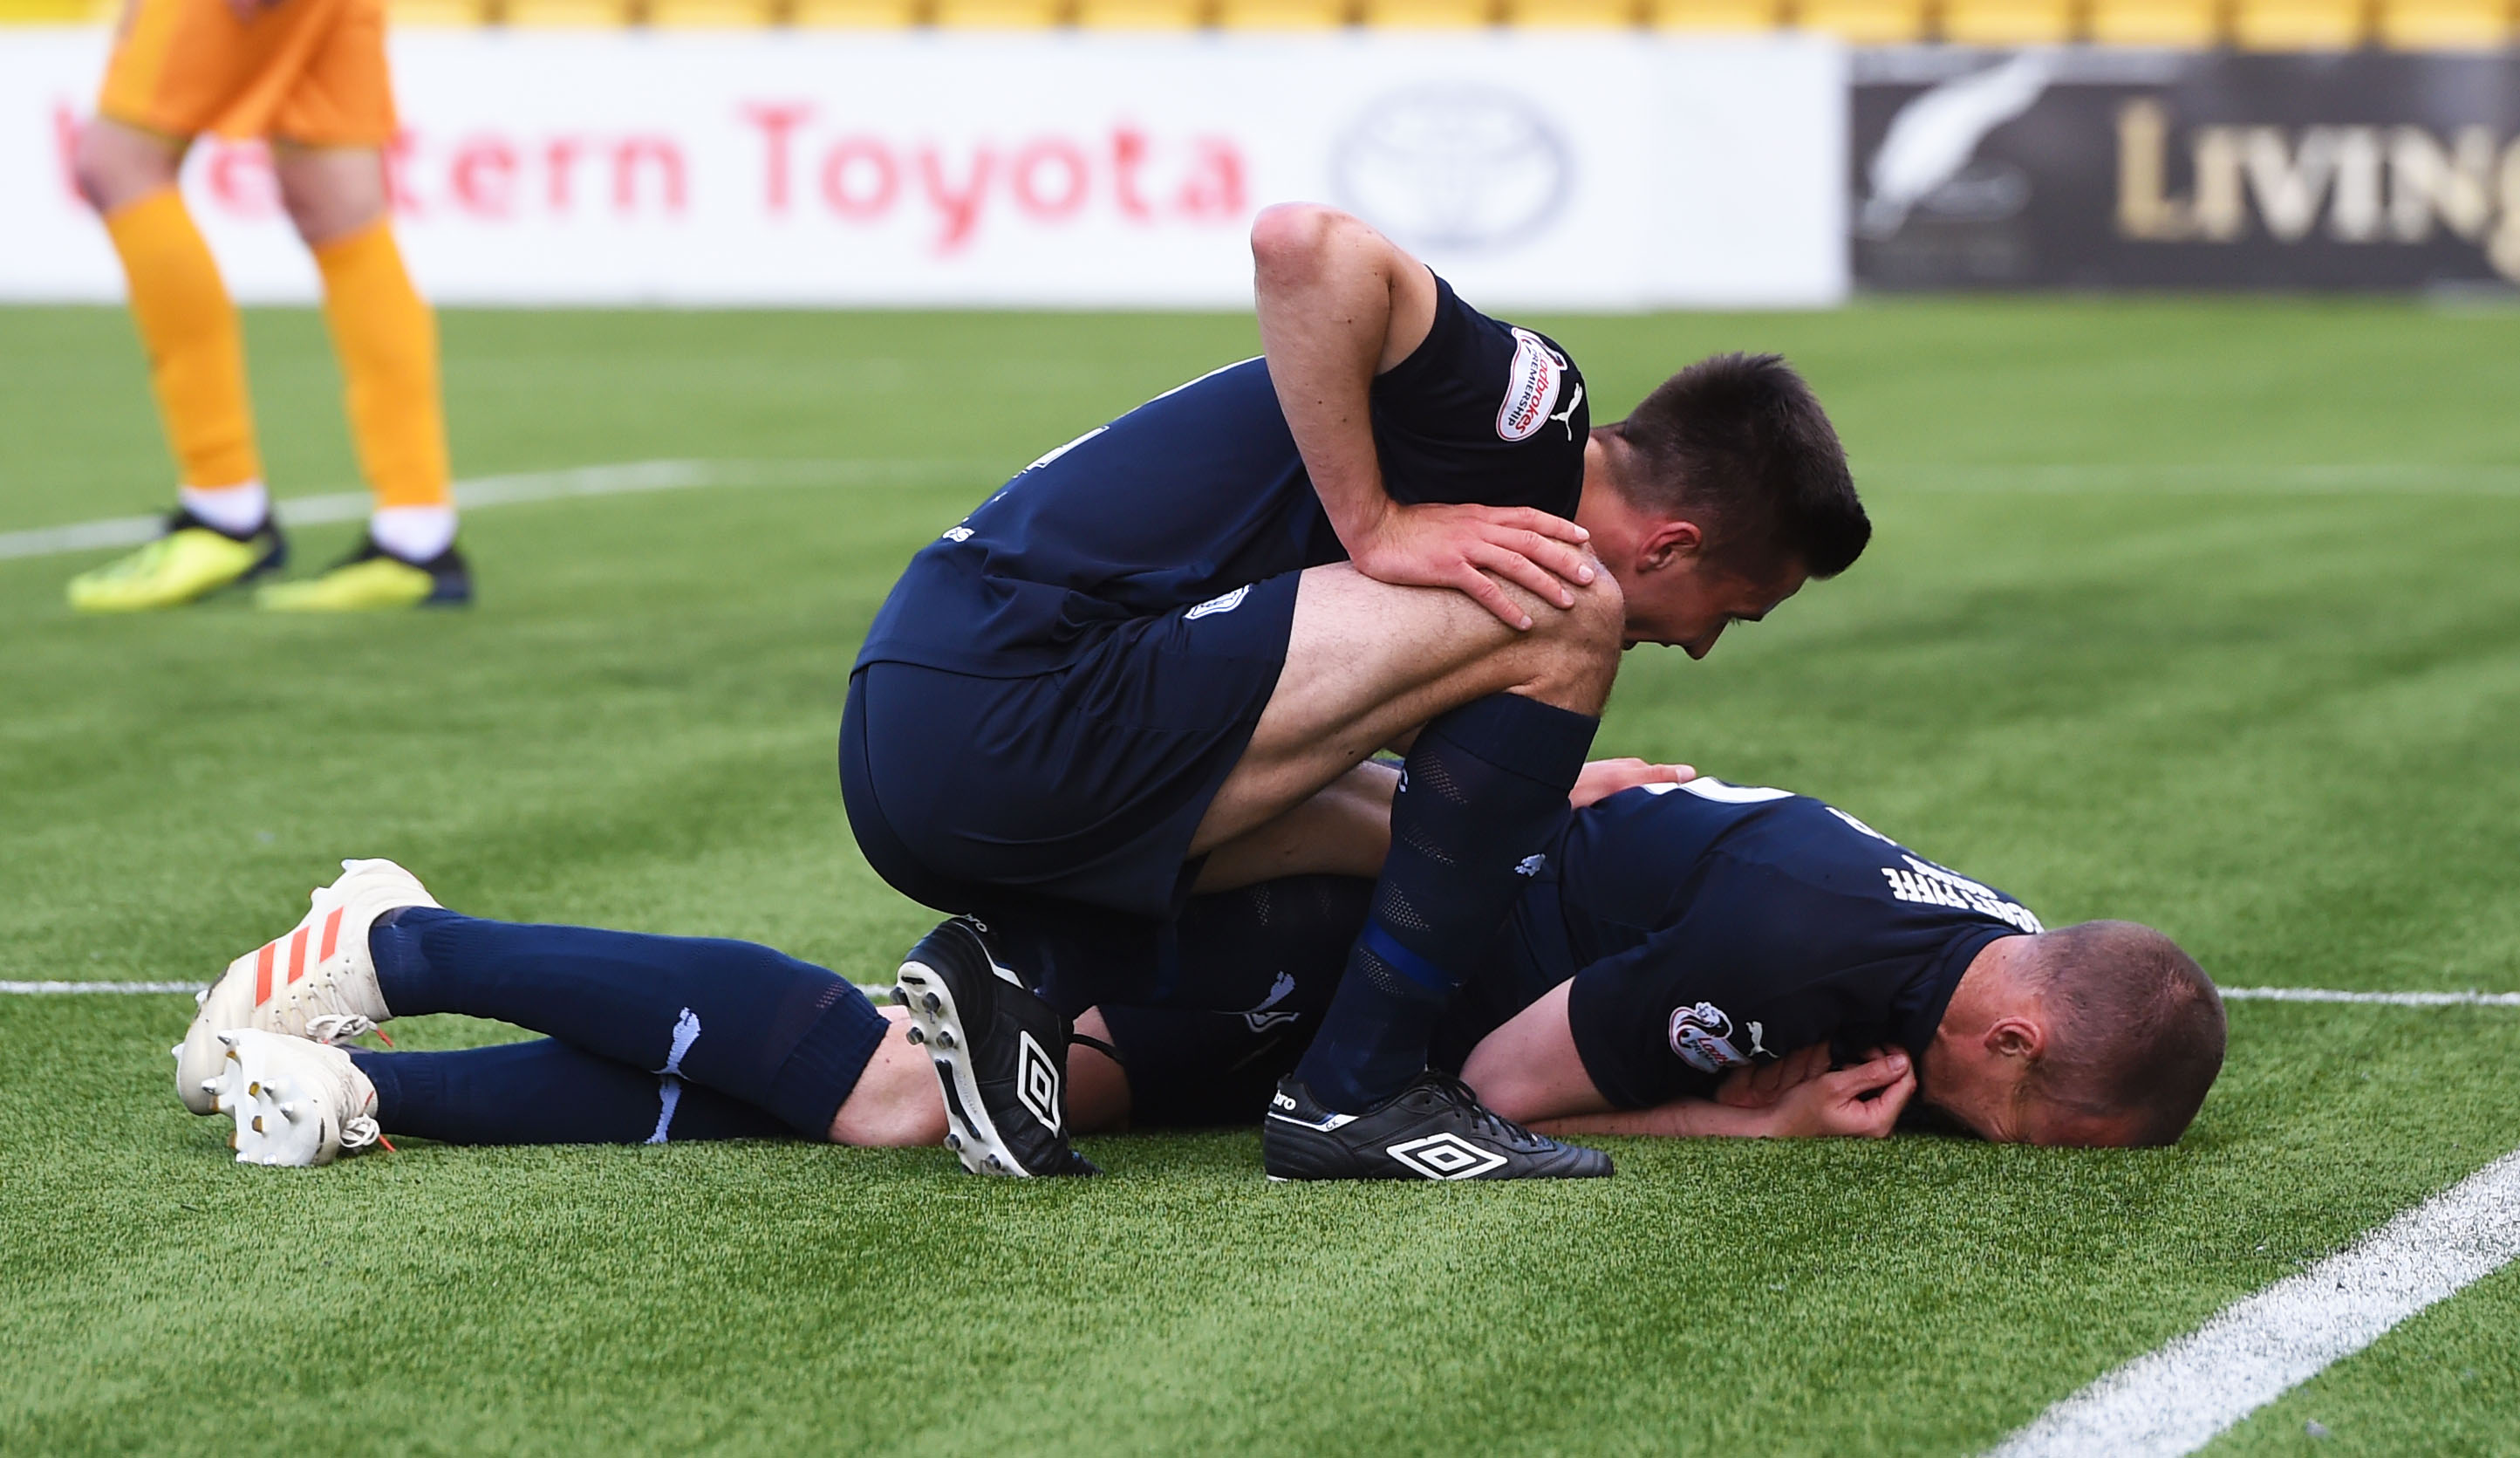 Kenny Miller gets injured as he opens the scoring.